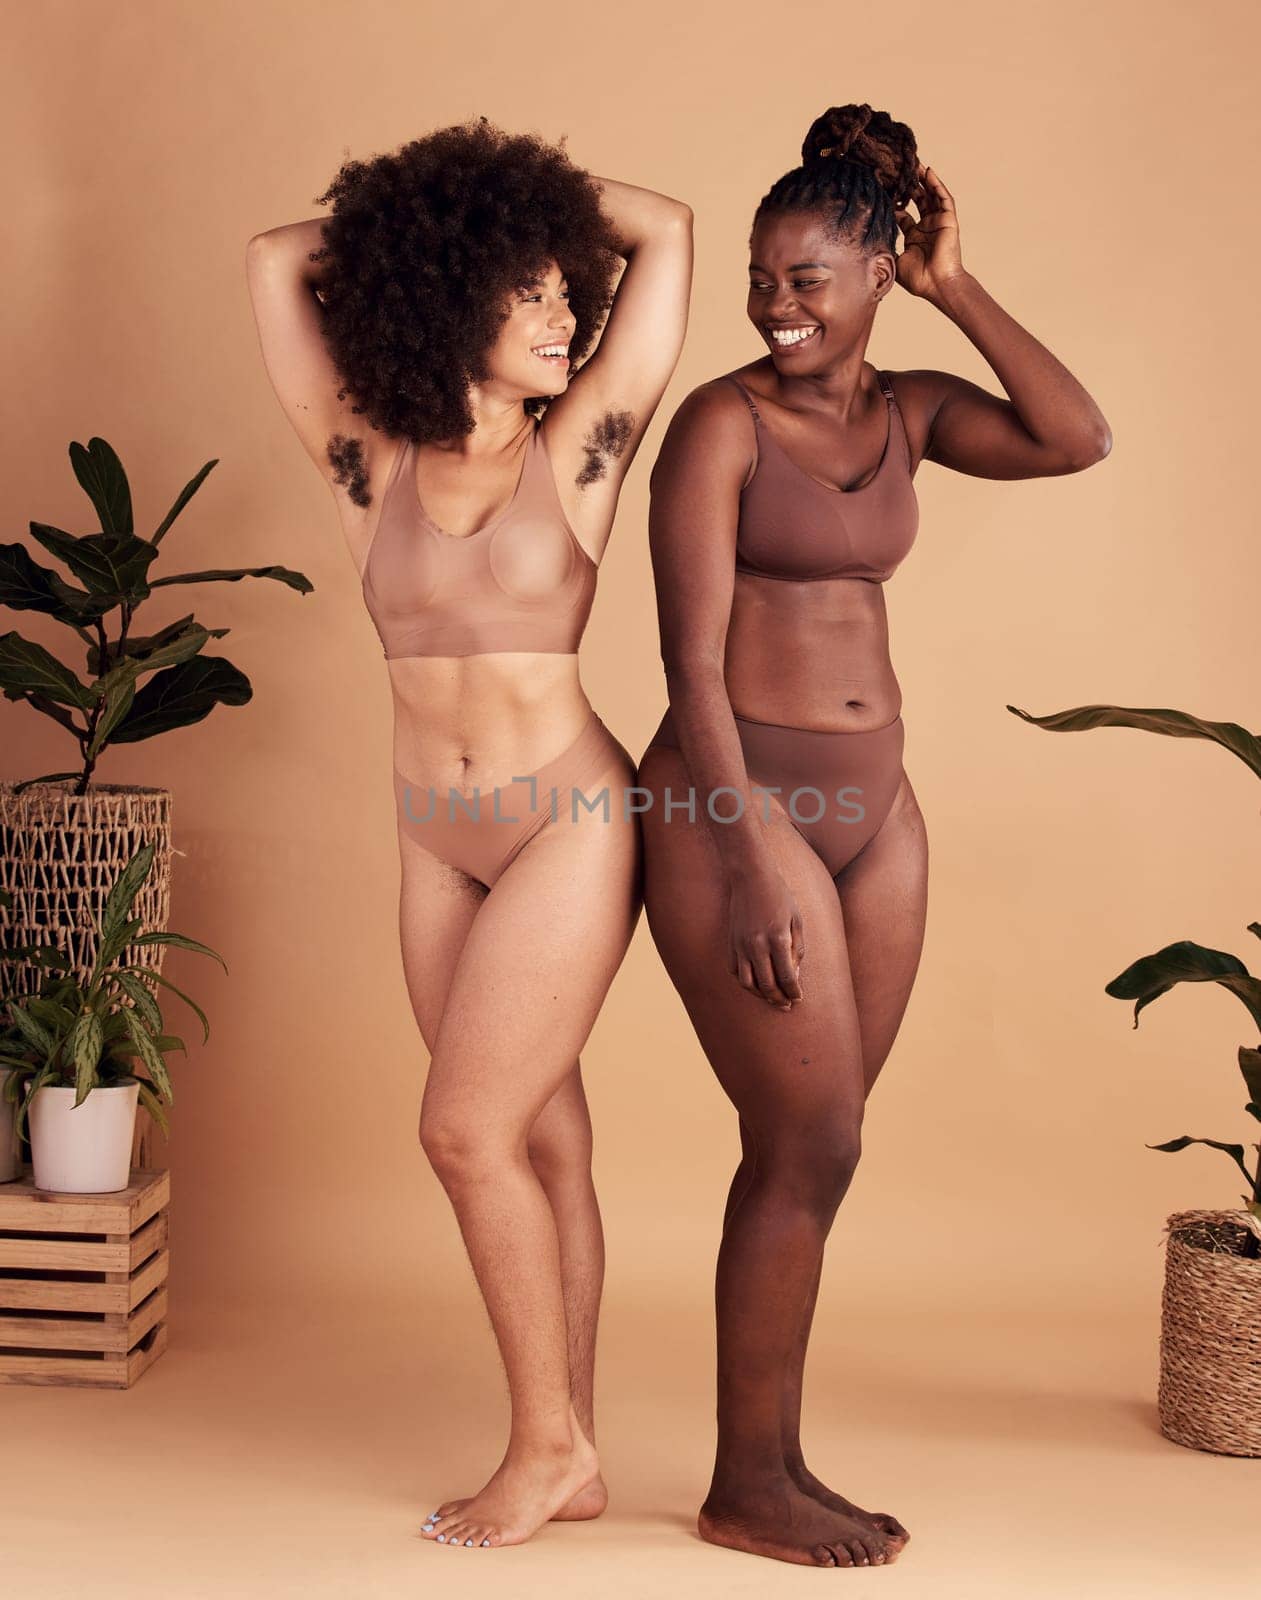 Diversity, body and natural with black woman friends in studio on a beige background for beauty or equality. Health, wellness and armpit hair with a model female and friend posing in underwear.